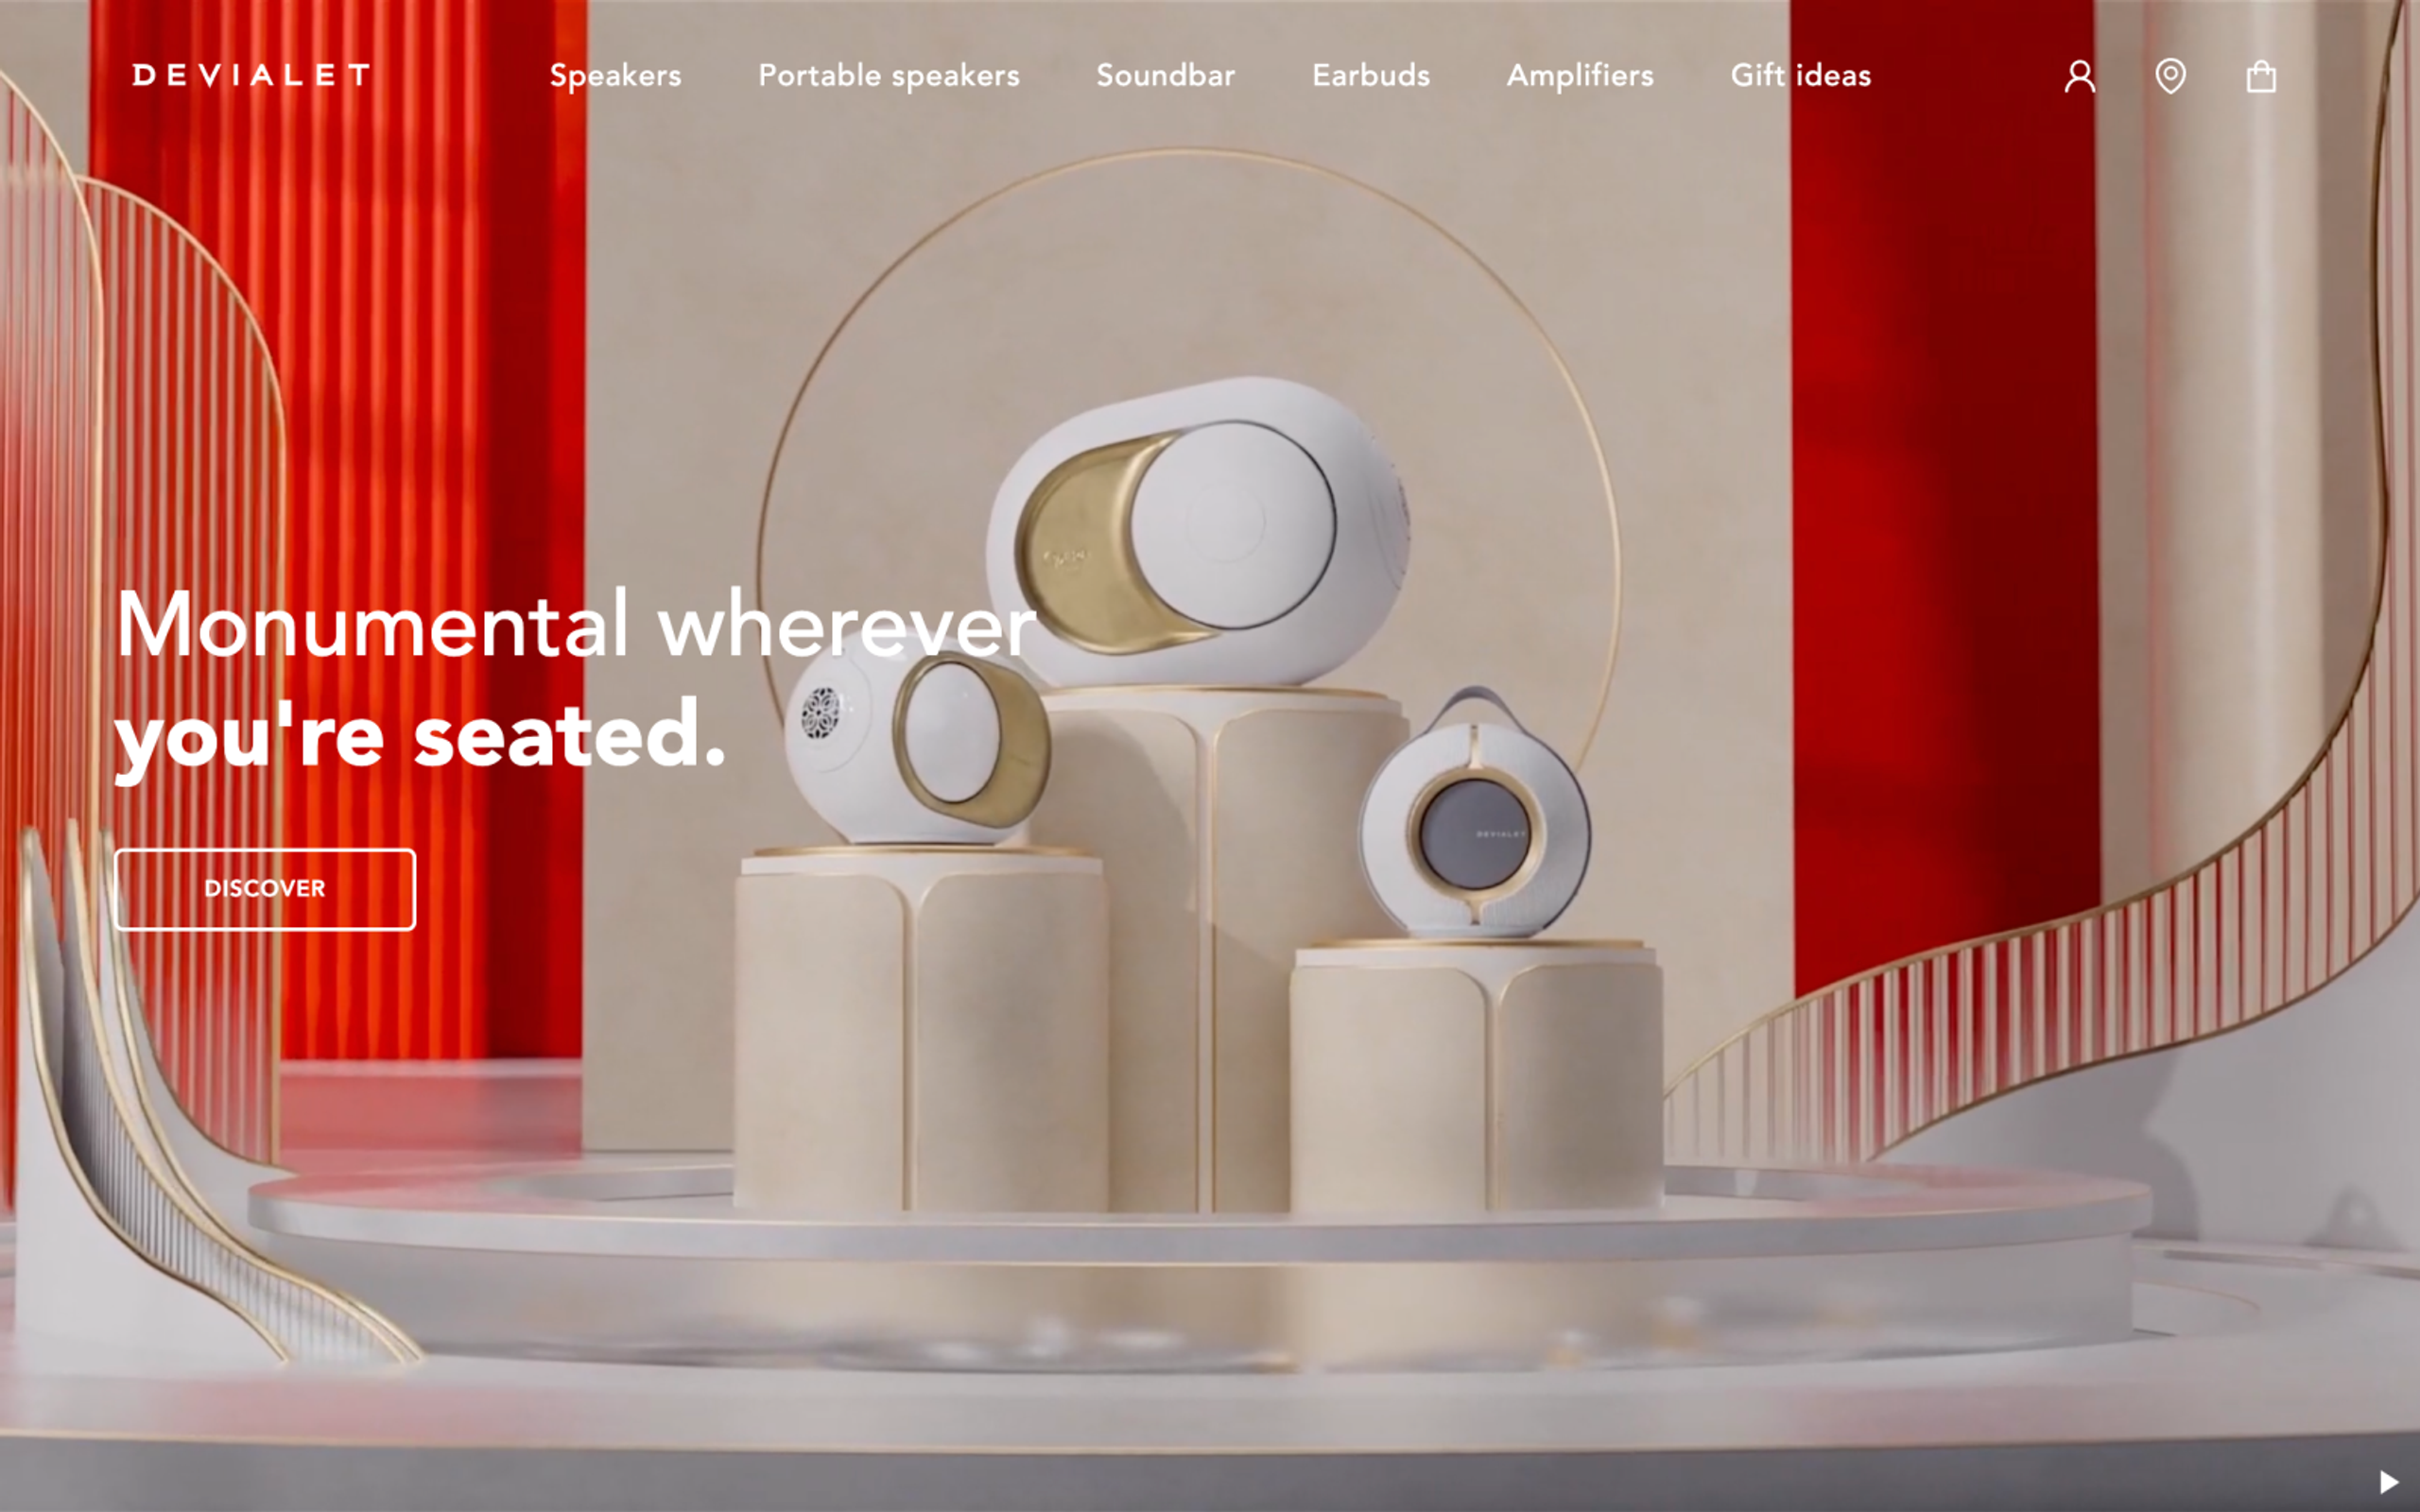 Devialet Home Page